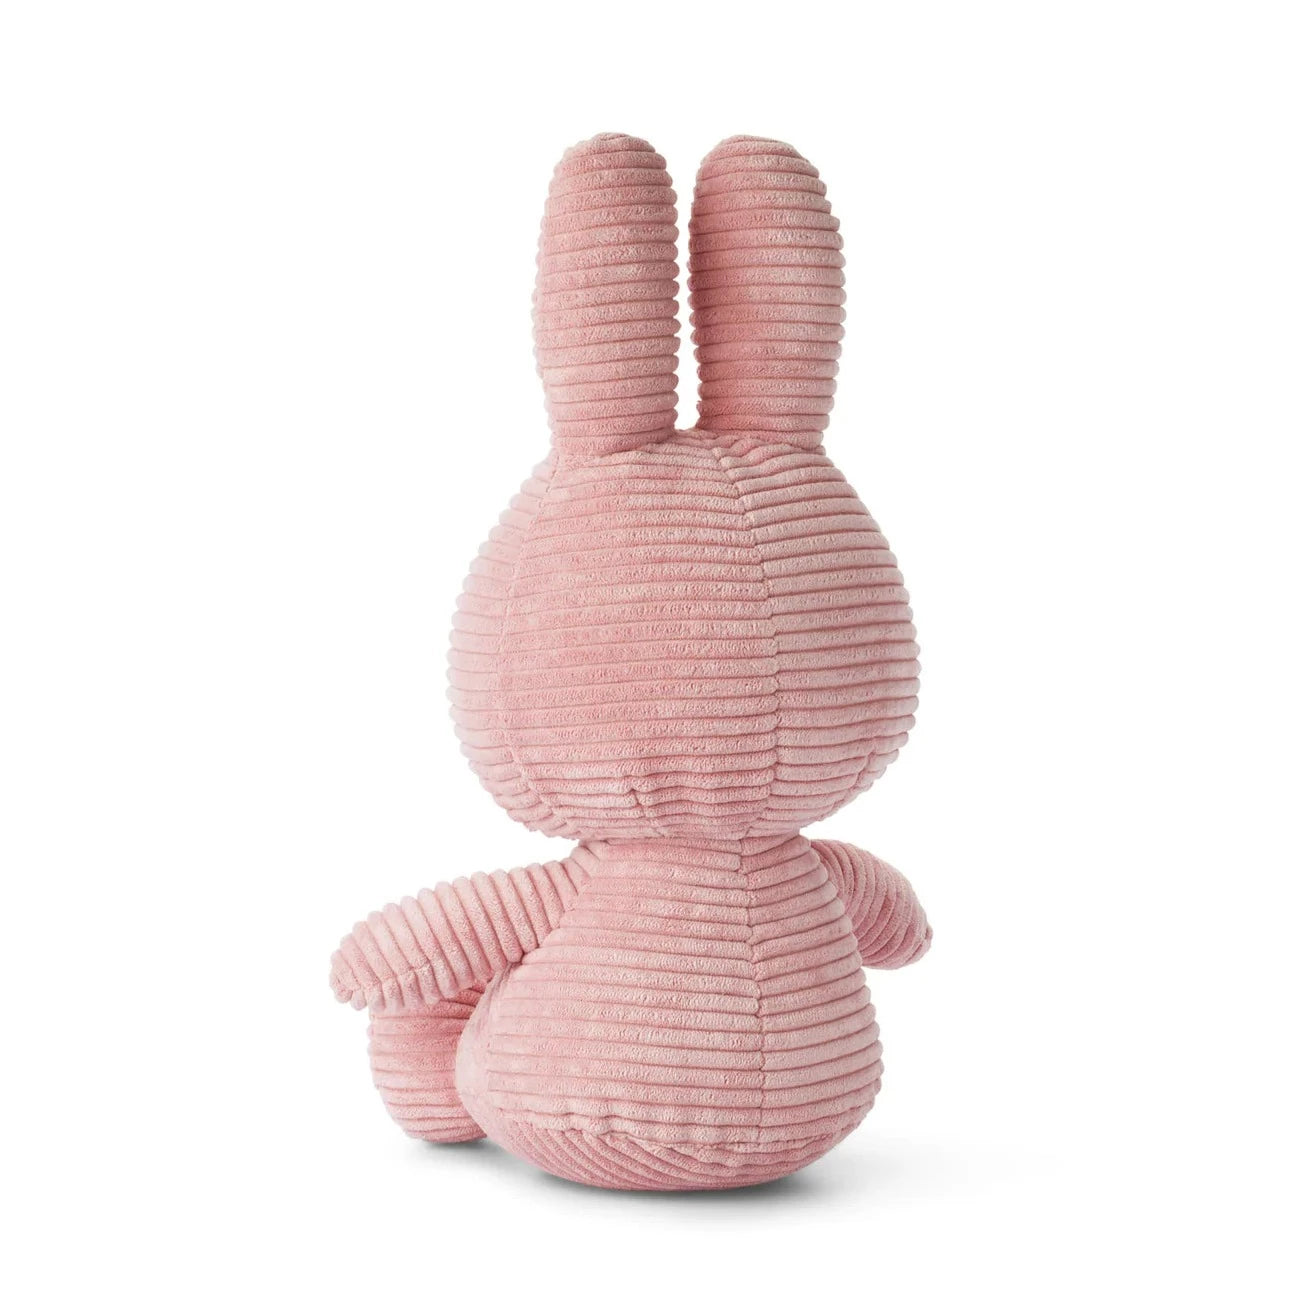 Miffy in Pink Corduroy